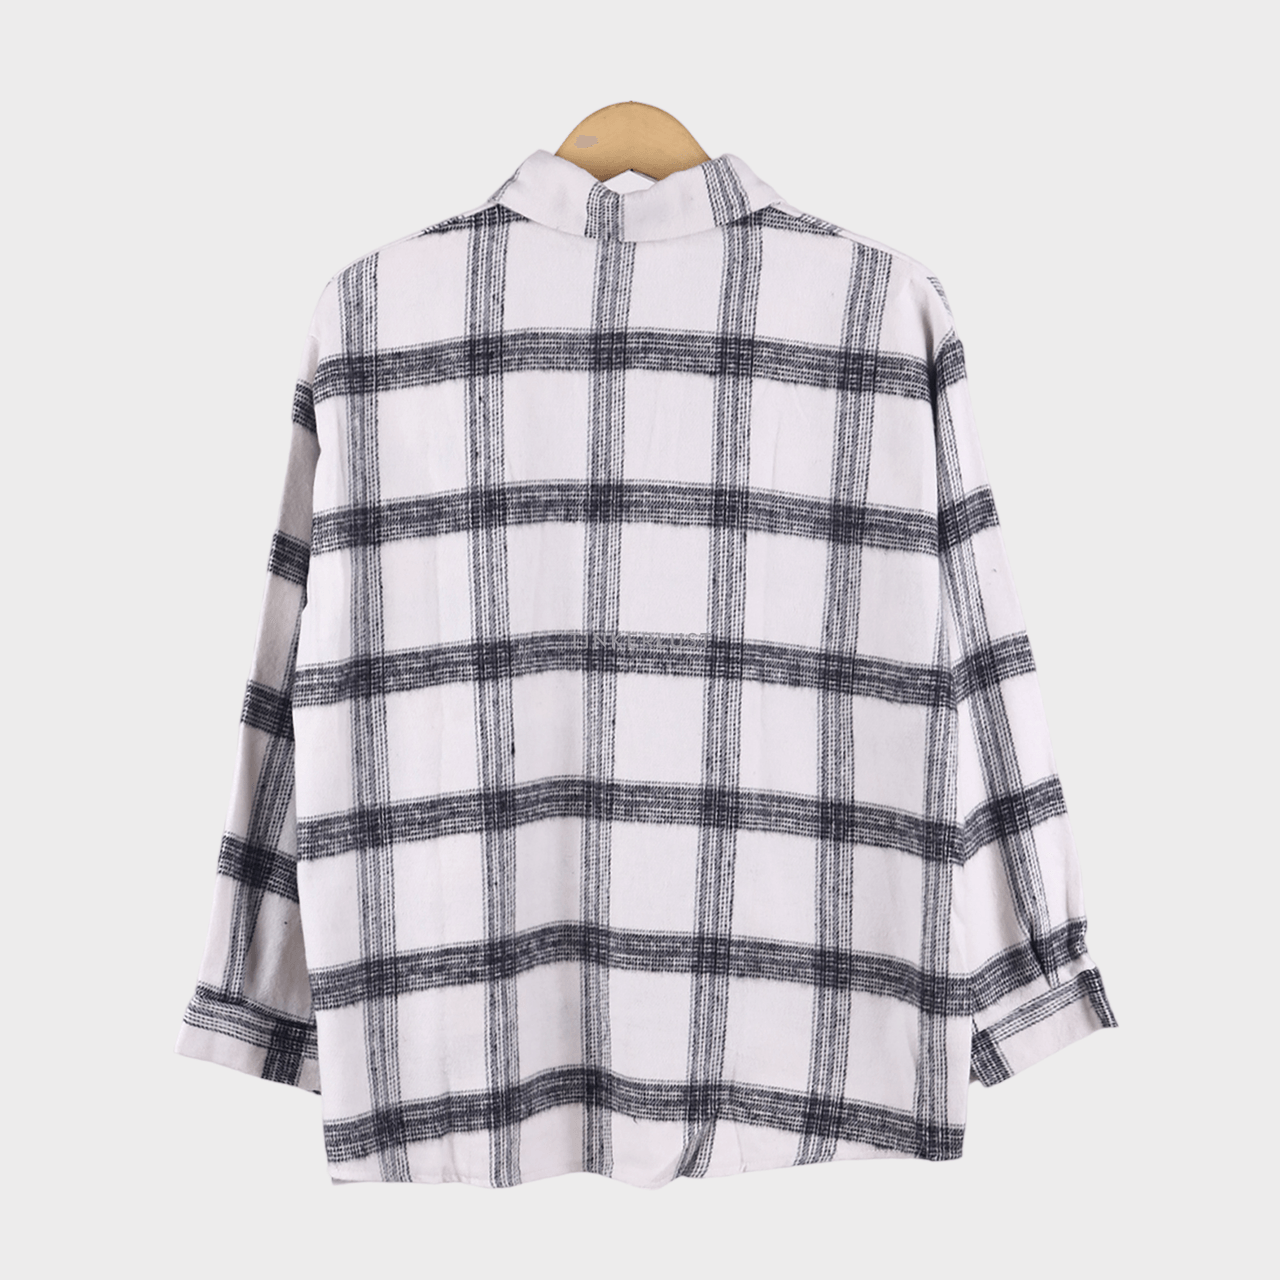 Private Collection Black & White Shirt